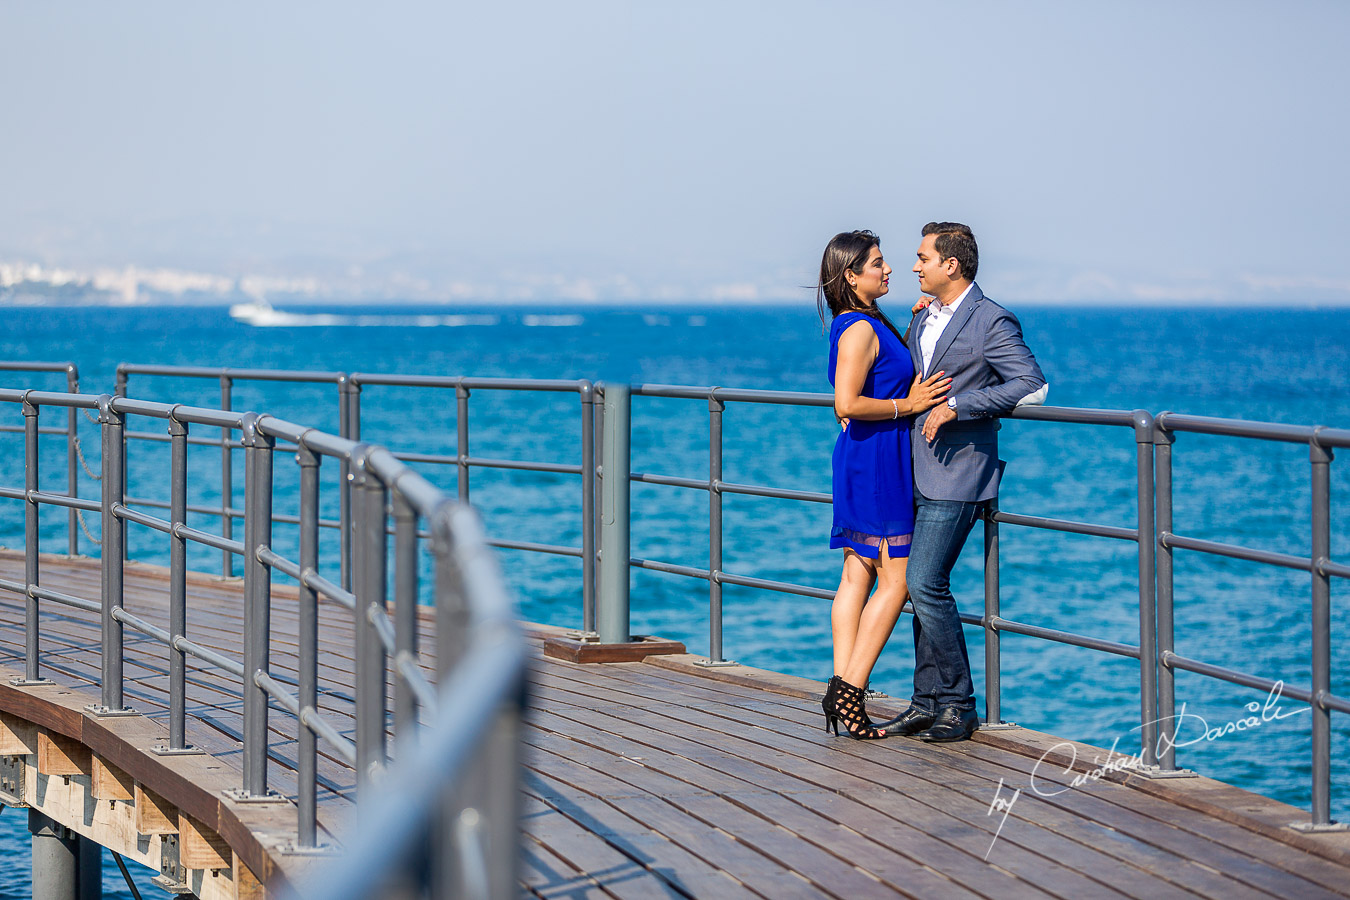 An After-Wedding Photo Shoot in Cyprus - 04